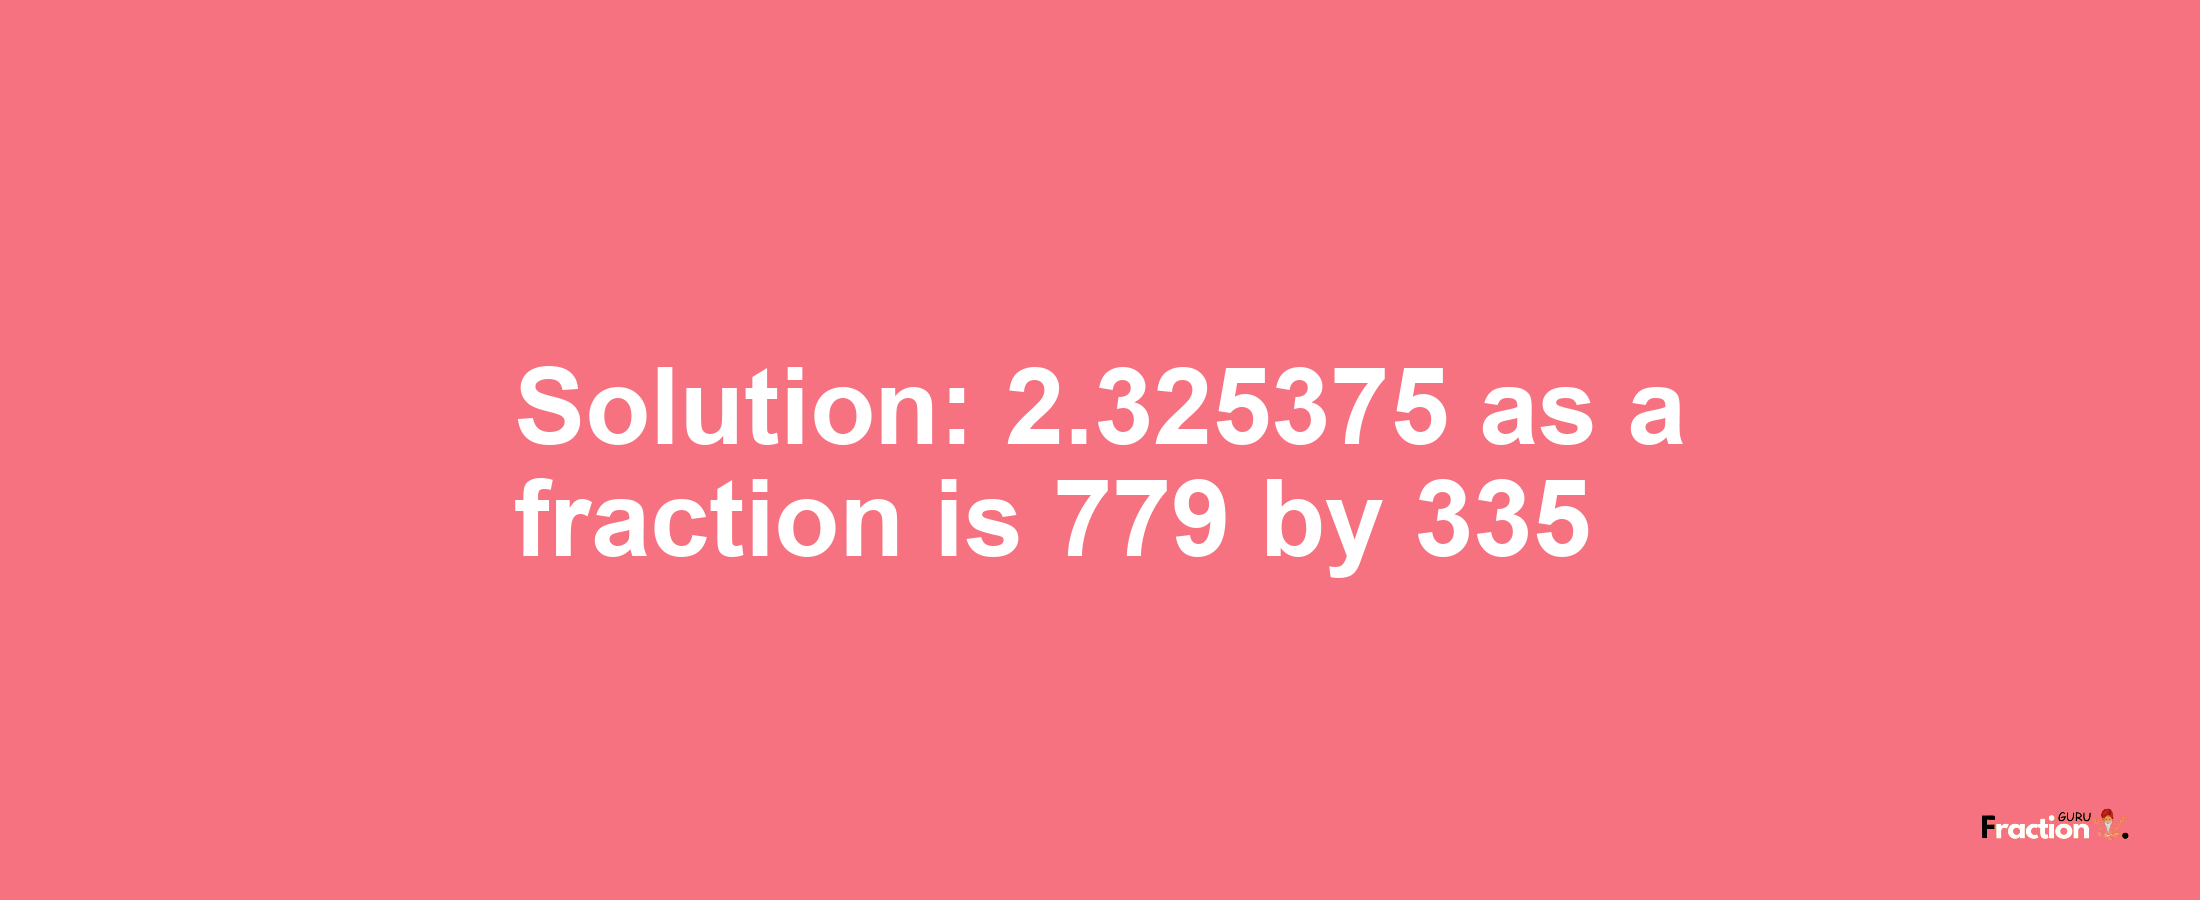 Solution:2.325375 as a fraction is 779/335